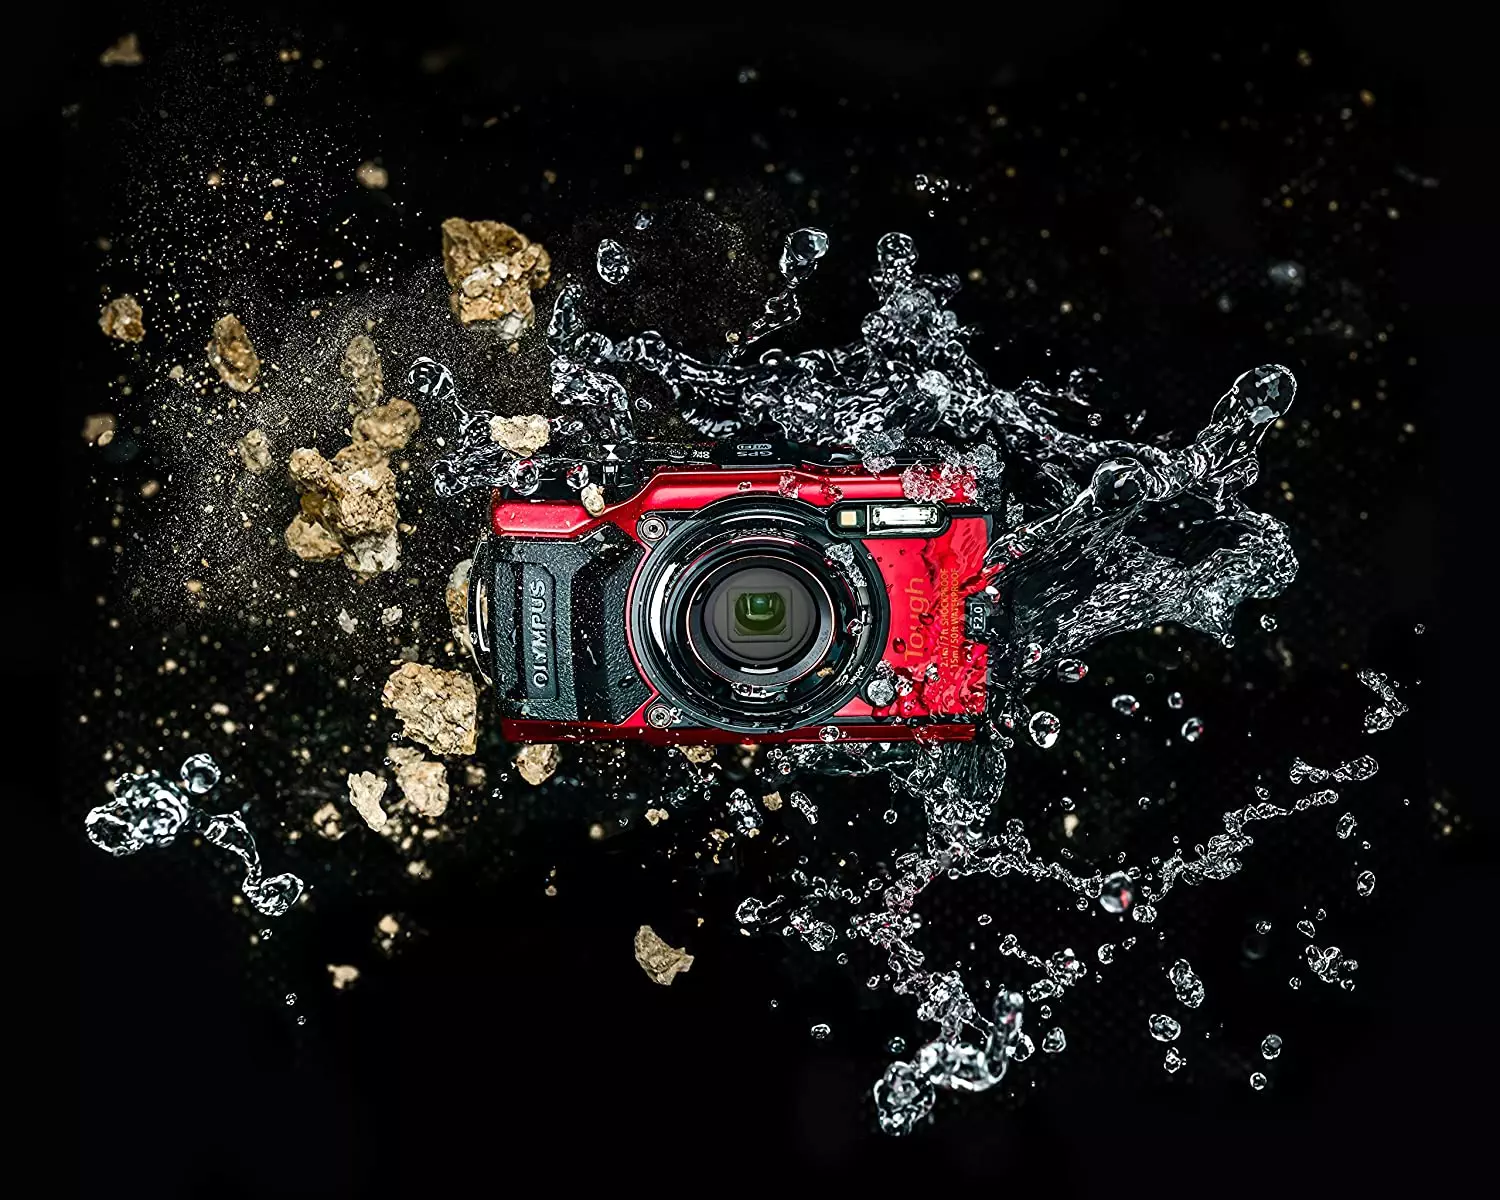 The Extreme Olympus Tough Tg6 Waterproof Camera